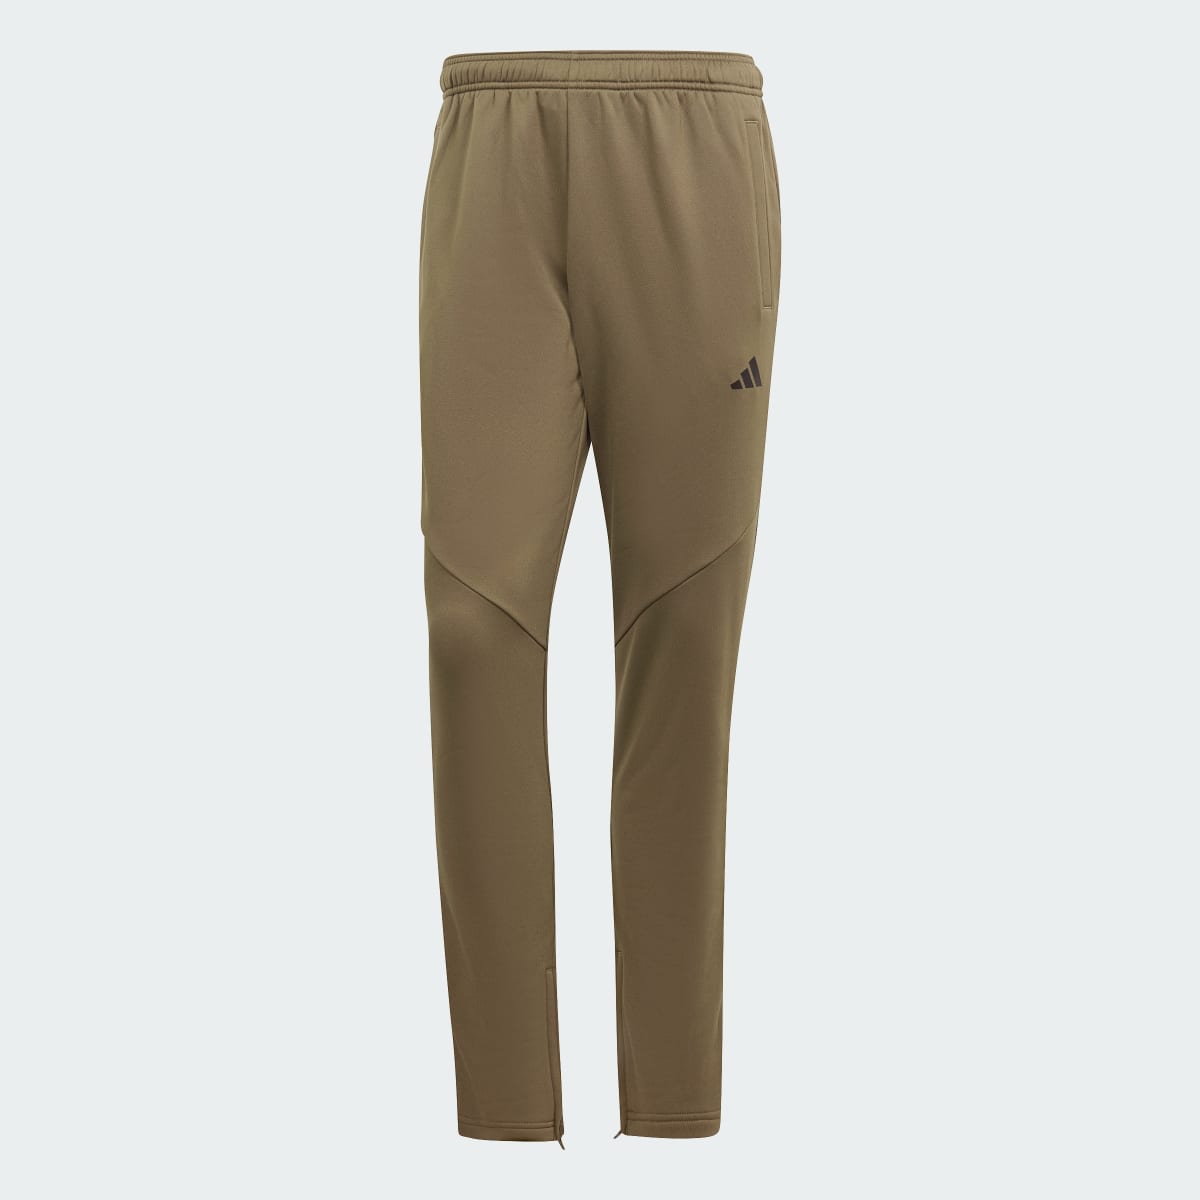 Adidas Game and Go Small Logo Training Tapered Pants. 4